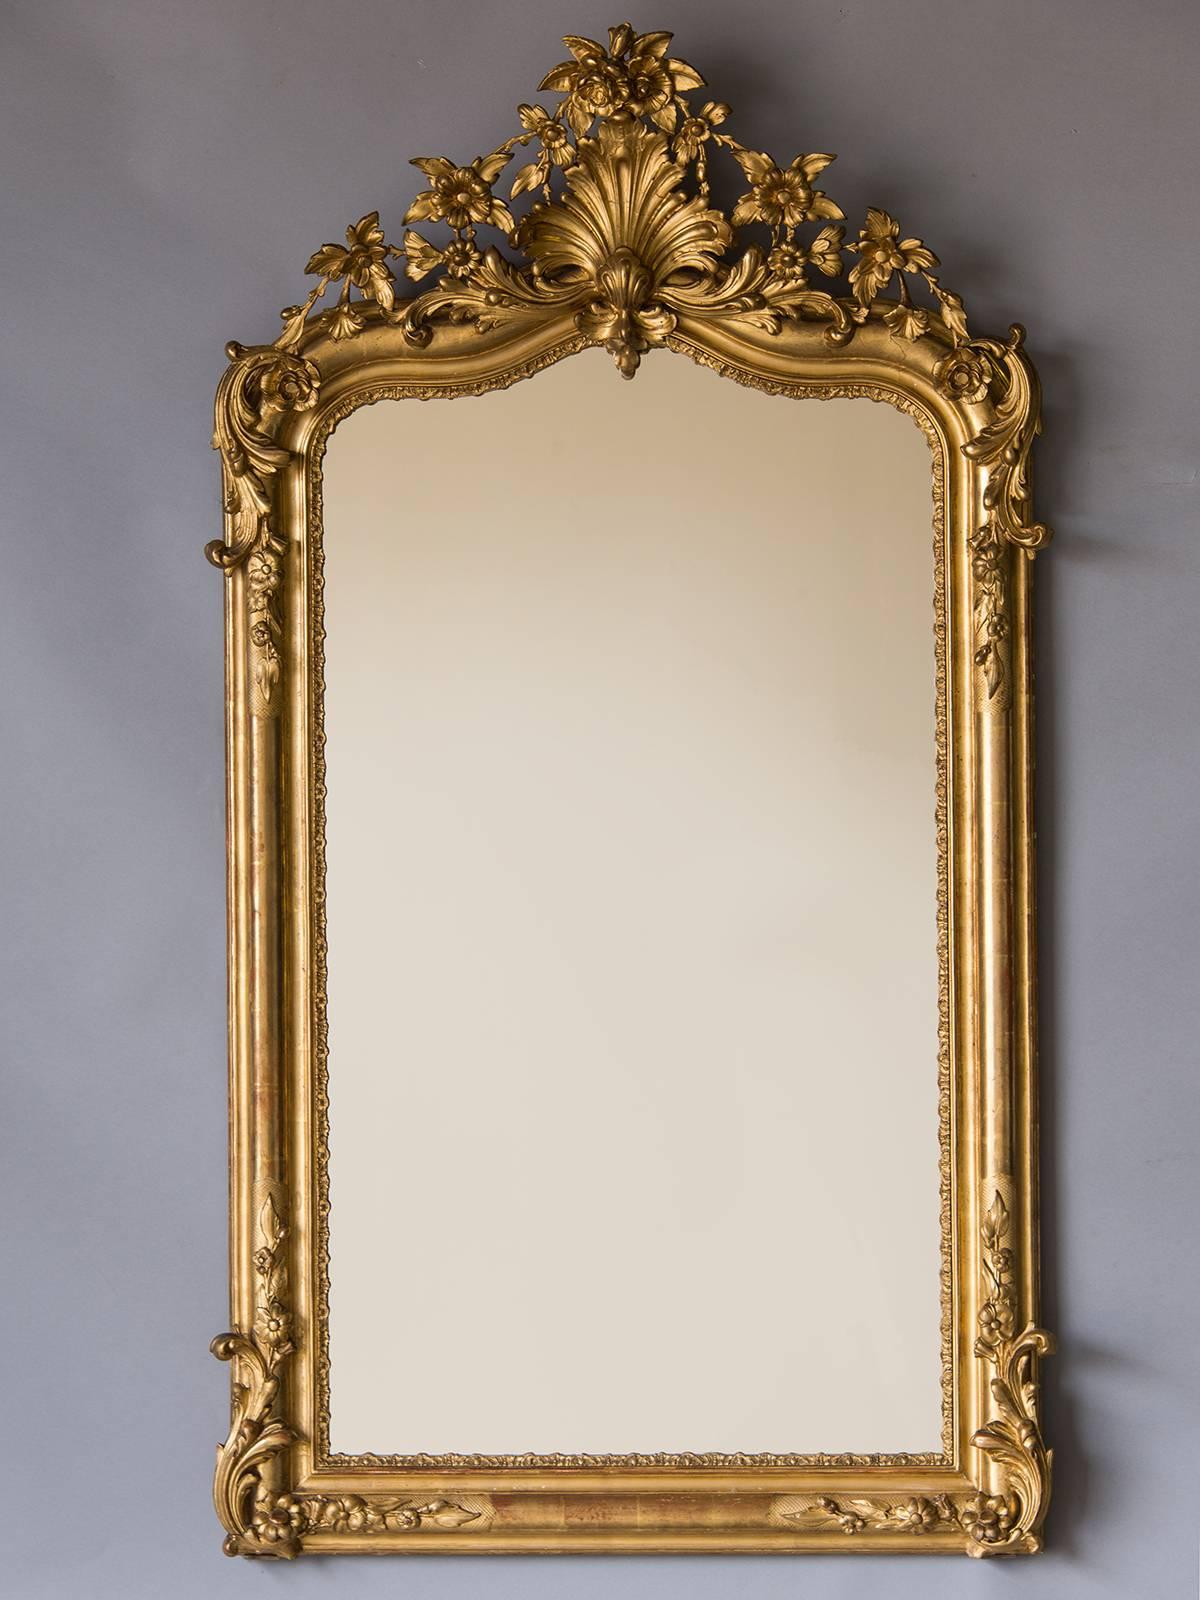 Late 19th Century French Régence Antique Gold Leaf Mirror, circa 1880